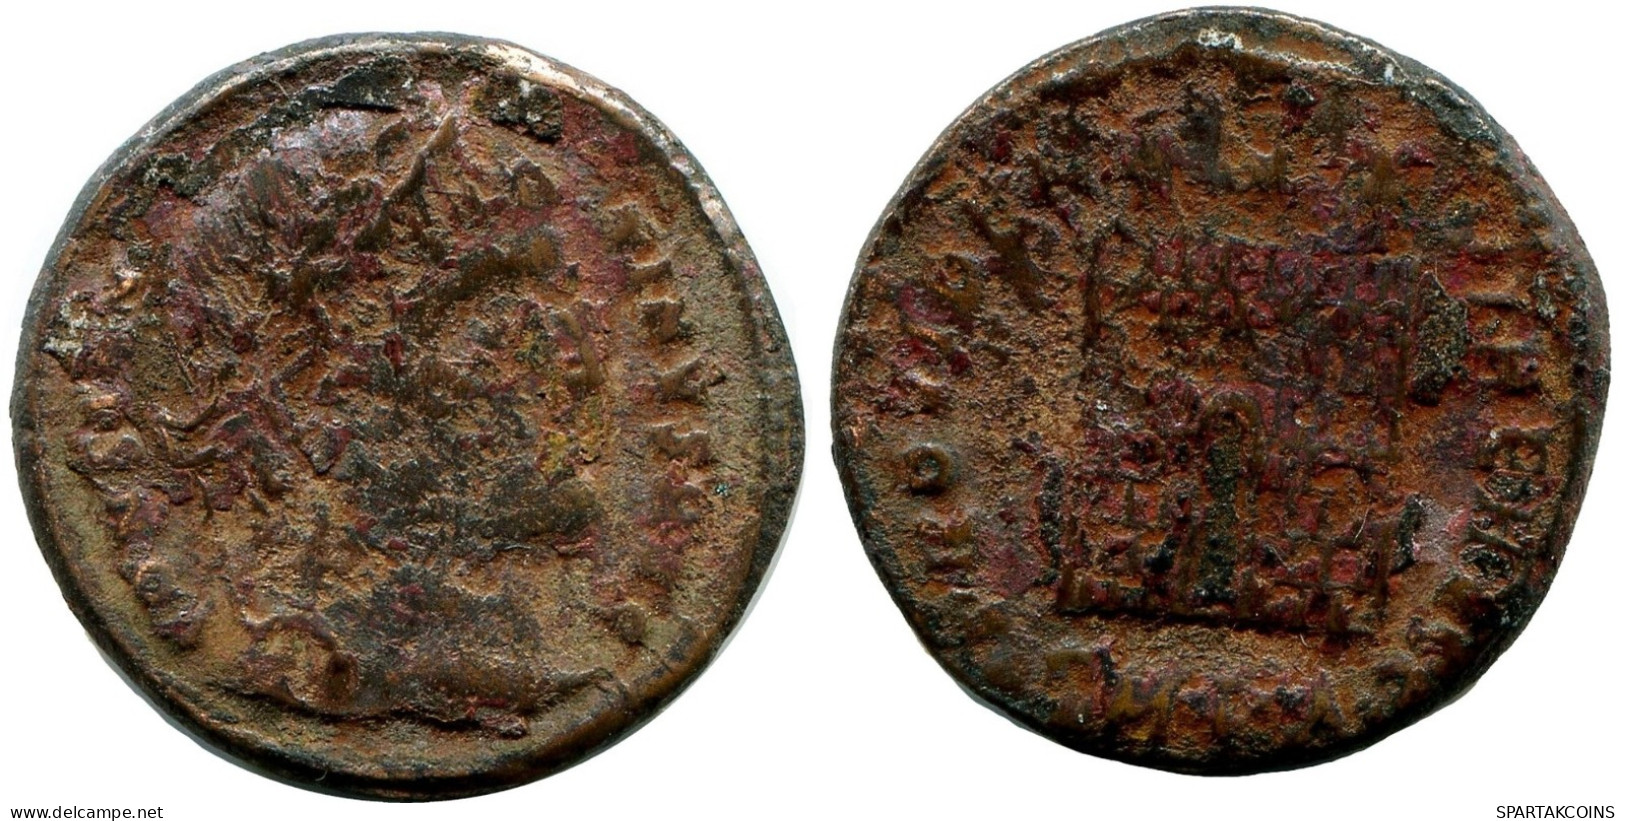 CONSTANTINE I MINTED IN CYZICUS FROM THE ROYAL ONTARIO MUSEUM #ANC11027.14.U.A - El Impero Christiano (307 / 363)